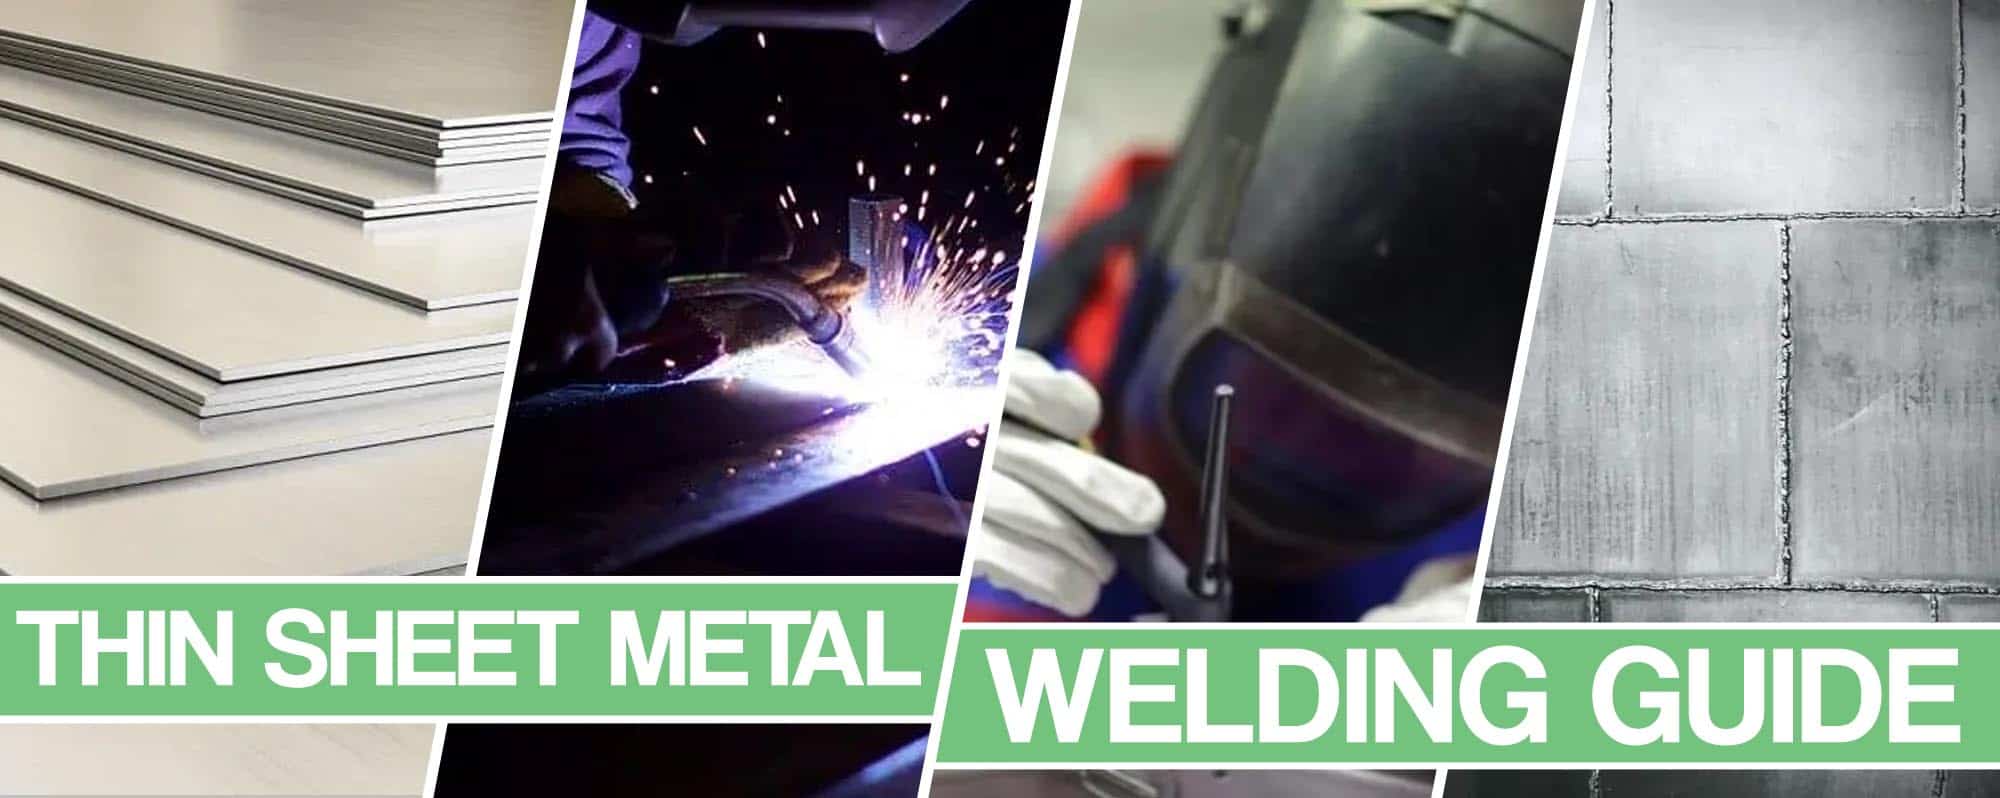 Feature image for How To Weld Sheet Metal article